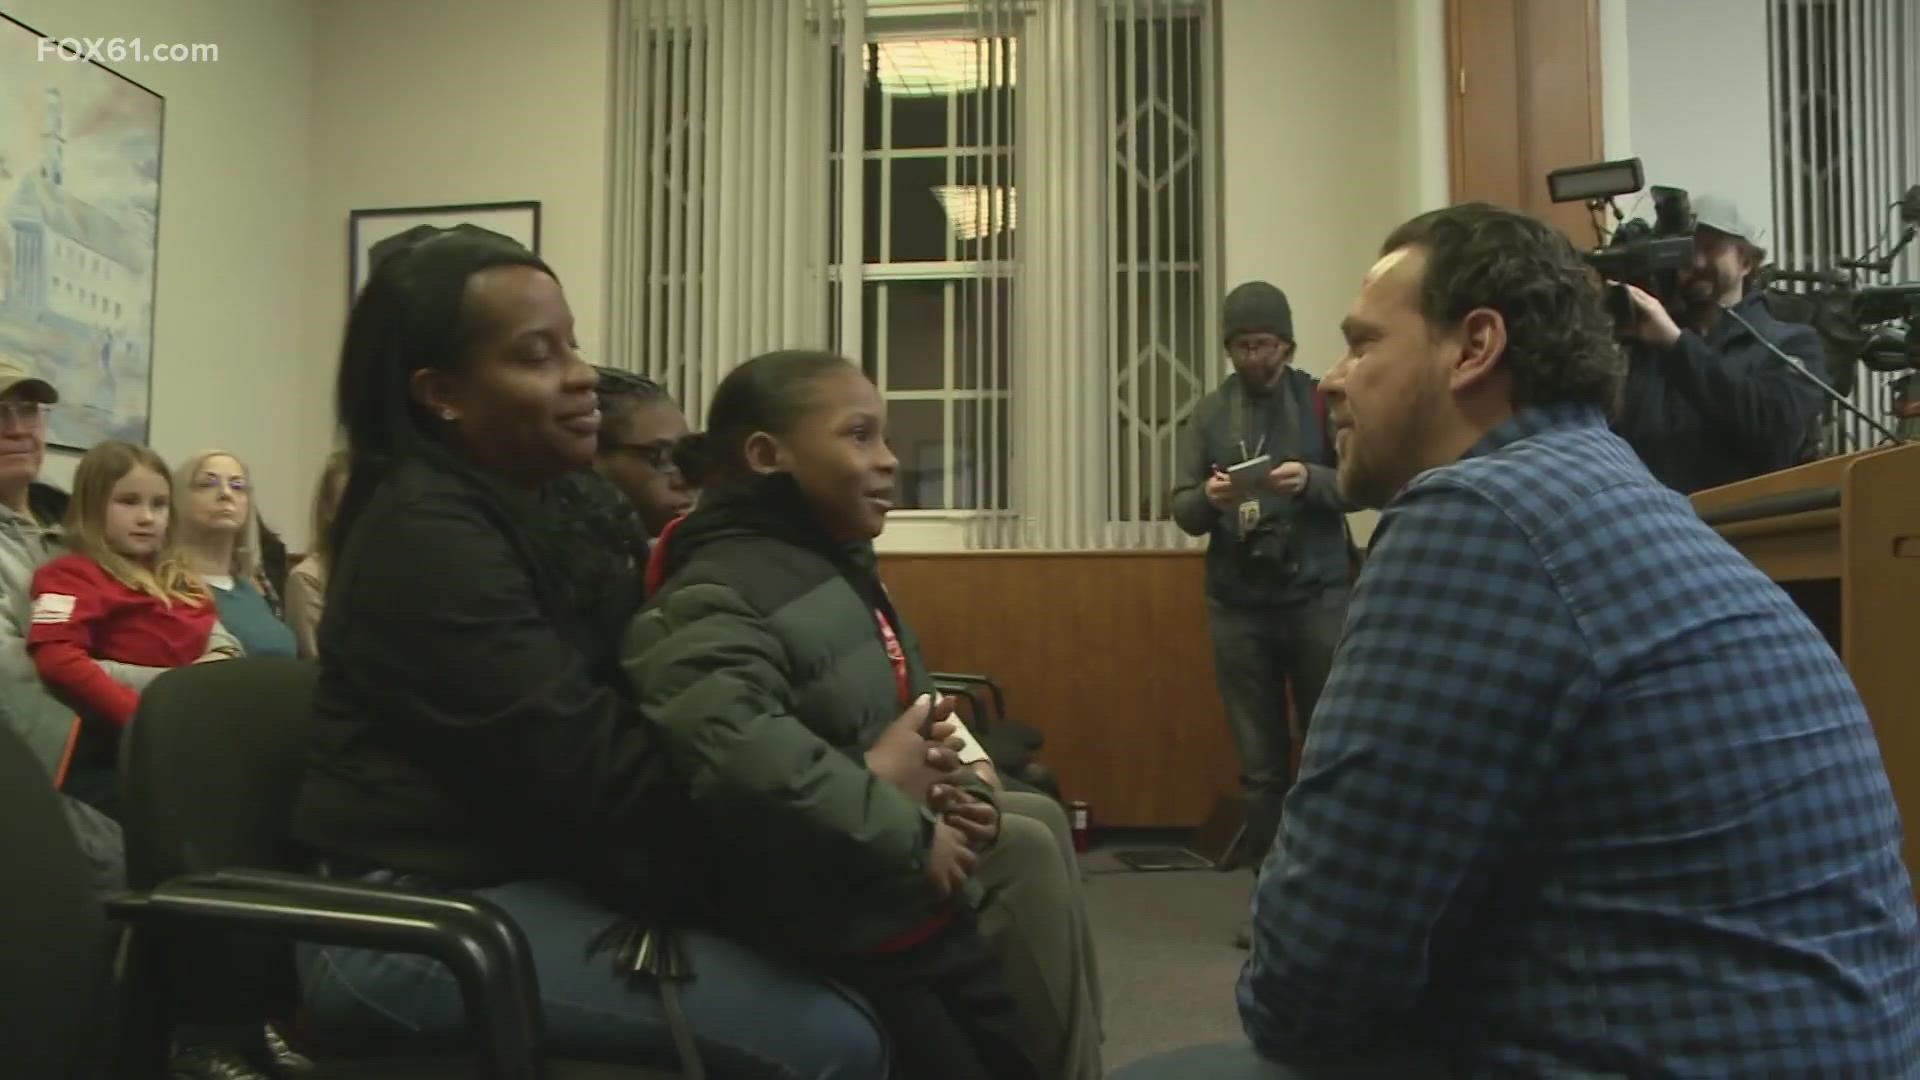 A Meriden family finally reunited with the men who saved their lives just weeks after their home burned down.